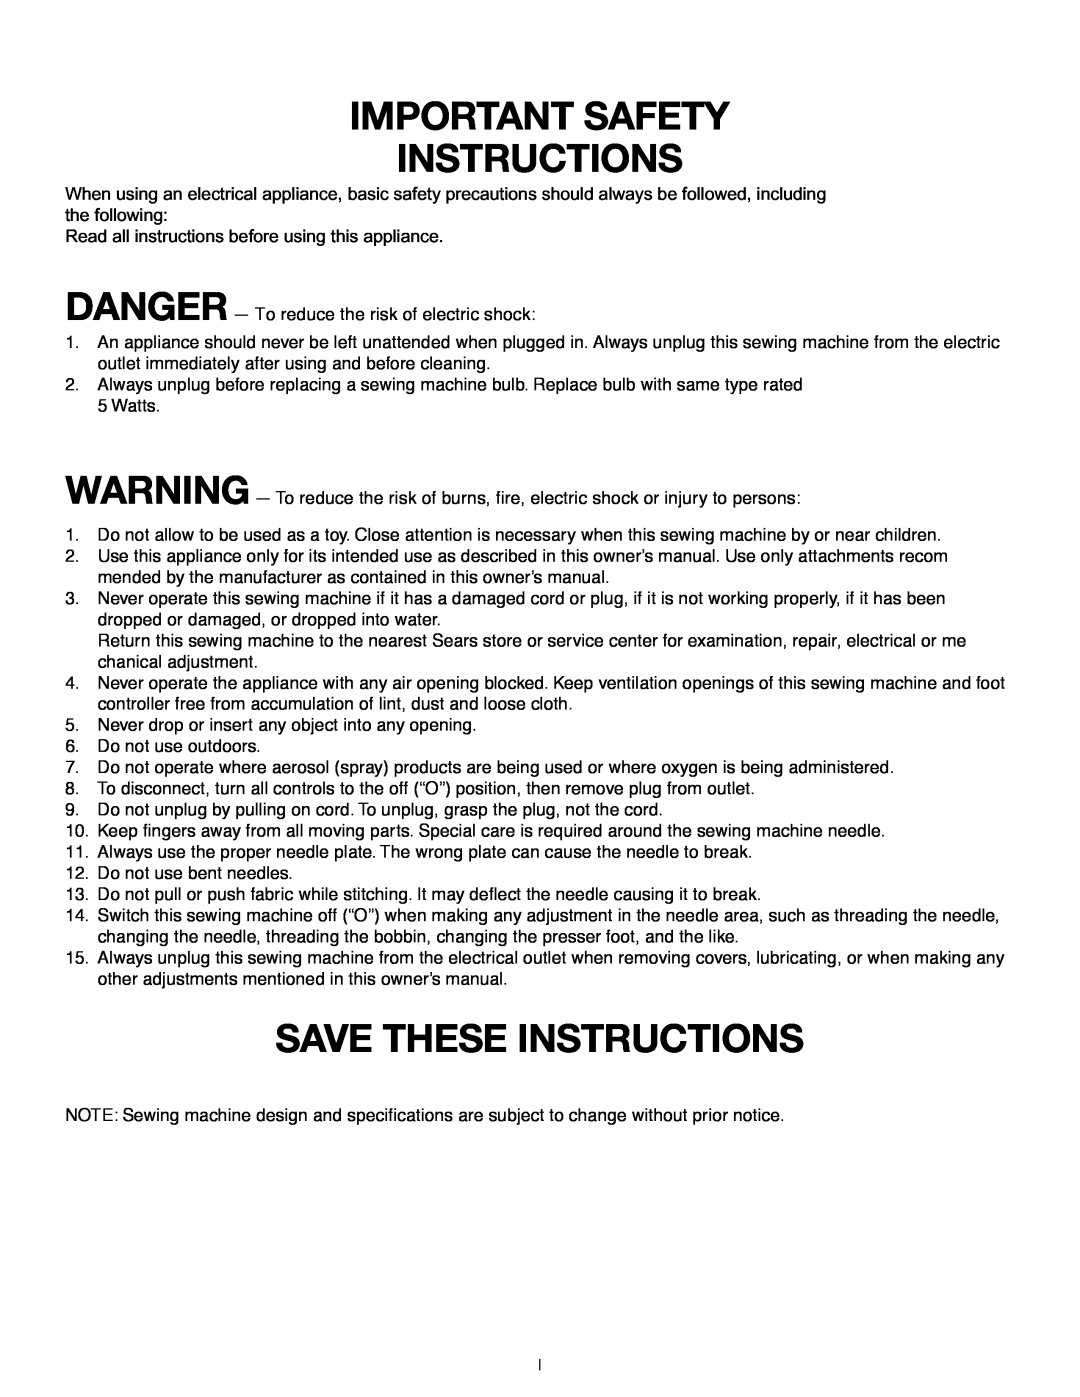 Janome MS-5027 Important Safety Instructions, Save These Instructions, Read all instructions before using this appliance 